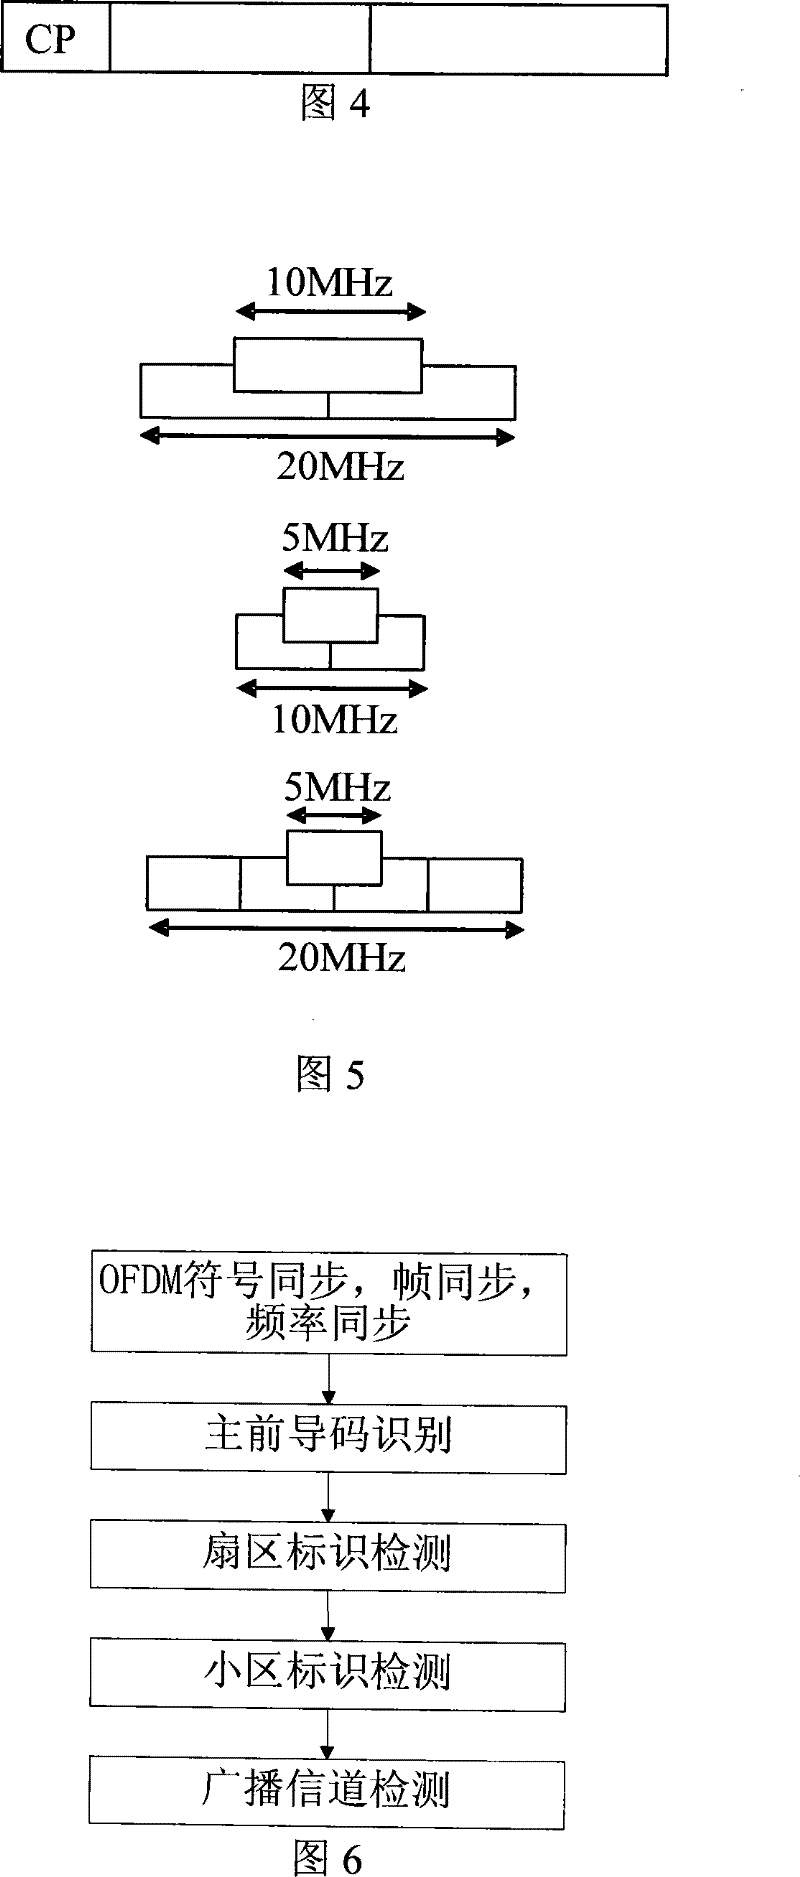 Synchronous information sending method of OFDM system and cell searching method